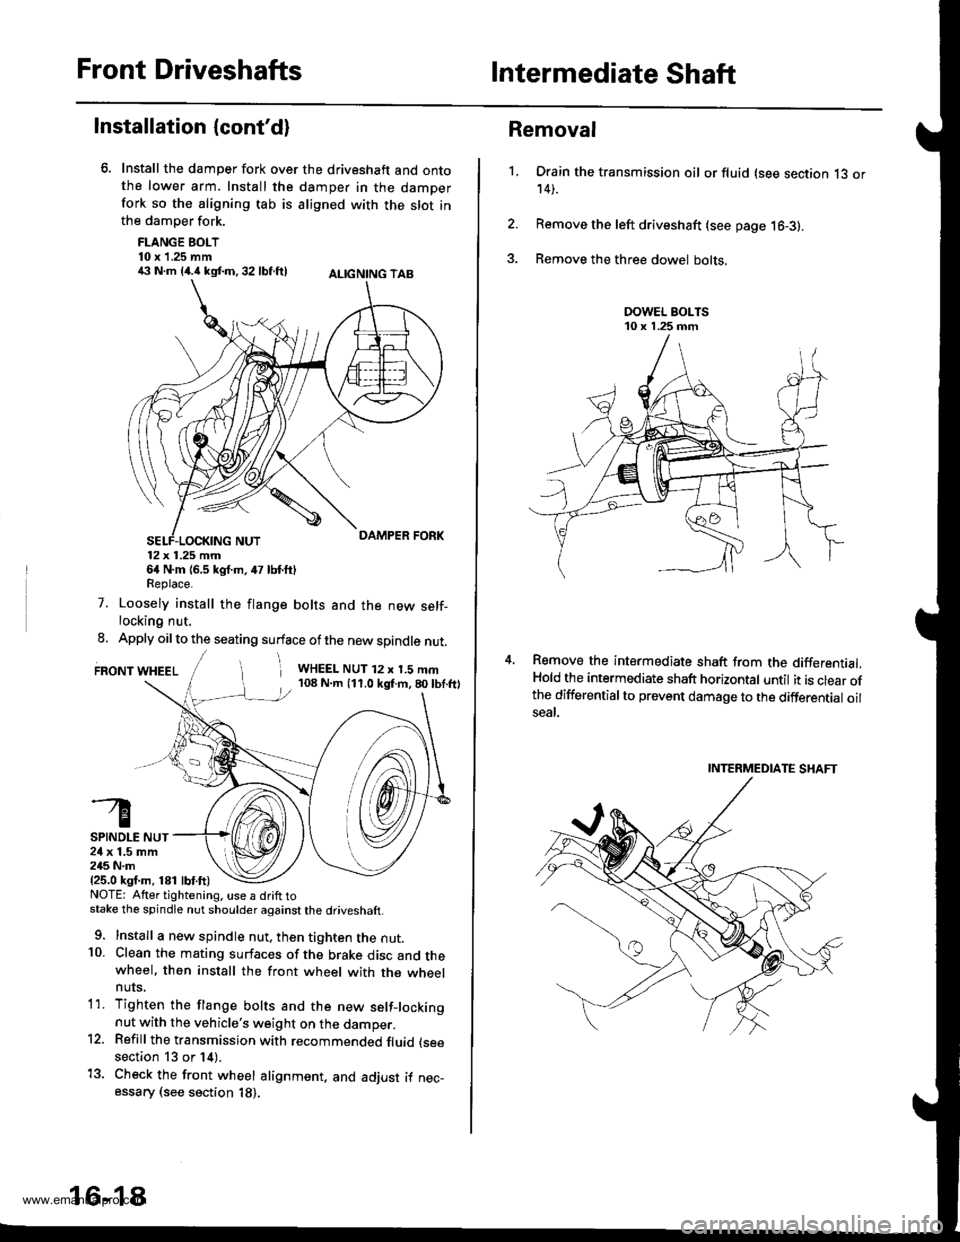 HONDA CR-V 1997 RD1-RD3 / 1.G Workshop Manual 
Front DriveshaftsIntermediate Shaft
Installation {contd}
Install the damper fork over the driveshaft and ontothe lower arm. Install the damper in the damperfork so the aligning tab is aligned with t